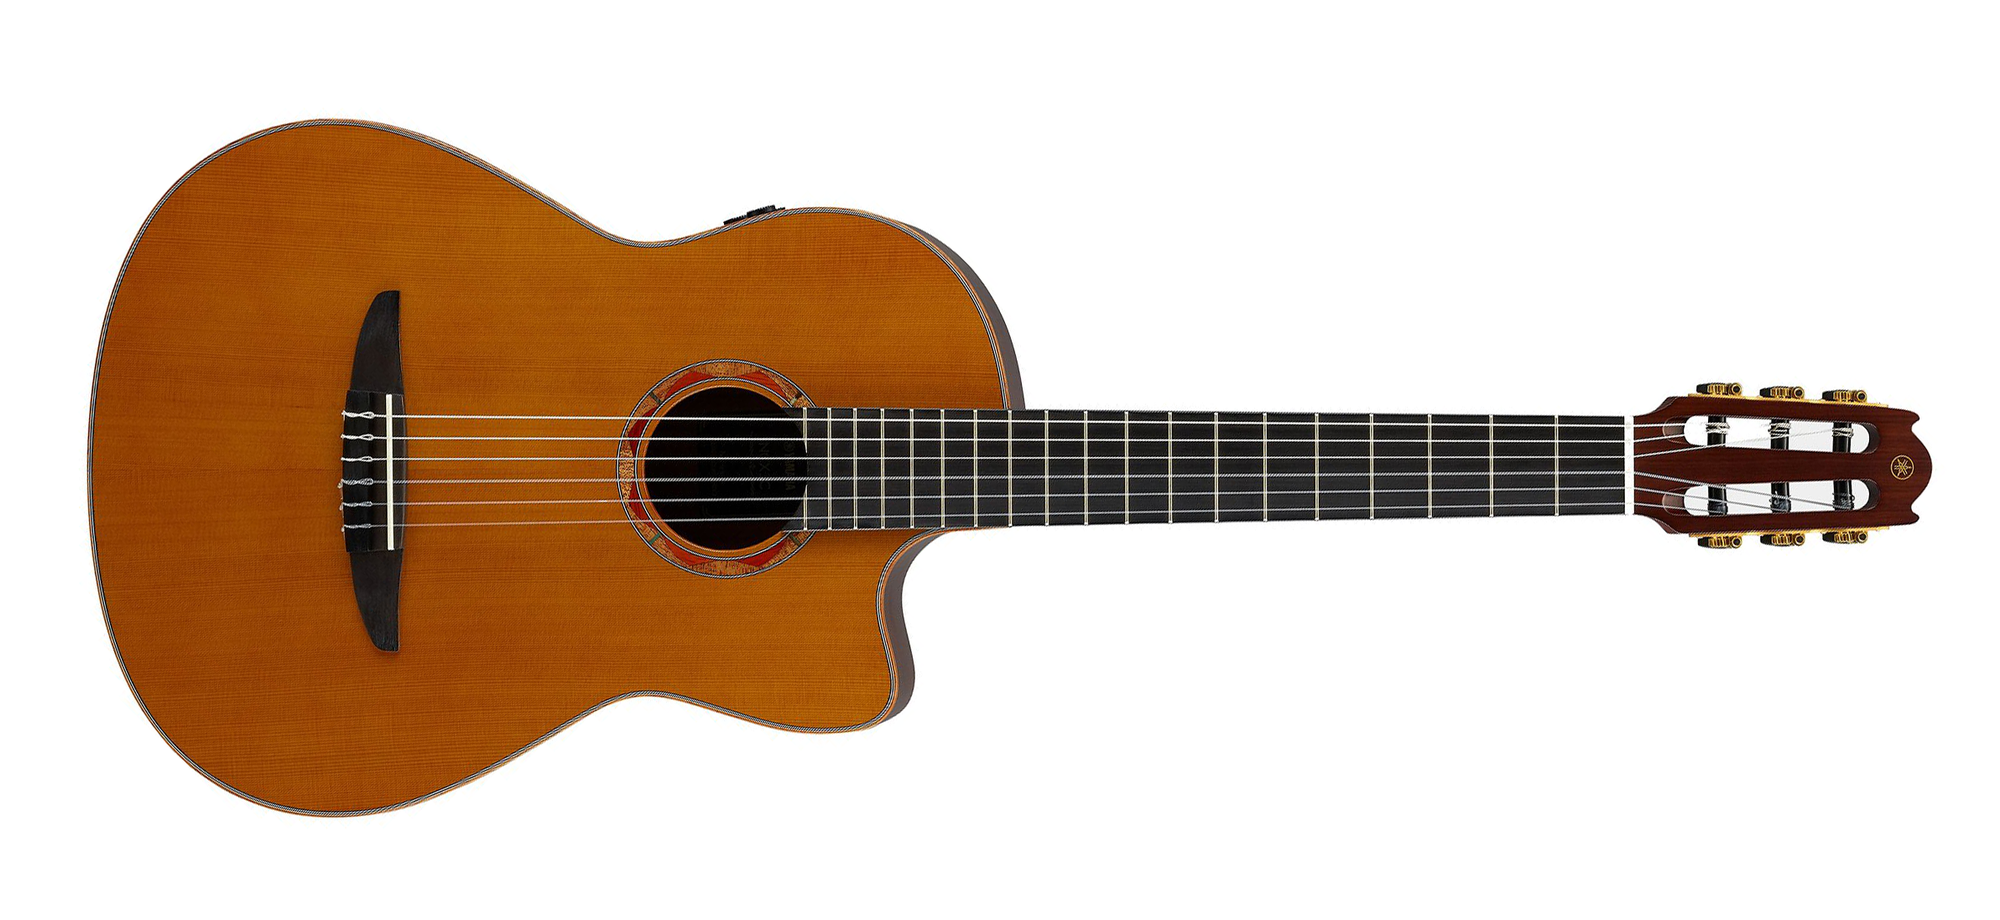 https://admin.shopify.com/store/the-guitar-world-00/products/7534415085657#:~:text=Submit-,Yamaha%20NCX3C%206%2DNylon%20String%20RH%20Acoustic%20Electric%20Classical%20Guitar%20with%20Case%2DNatural,-Media%201%20of